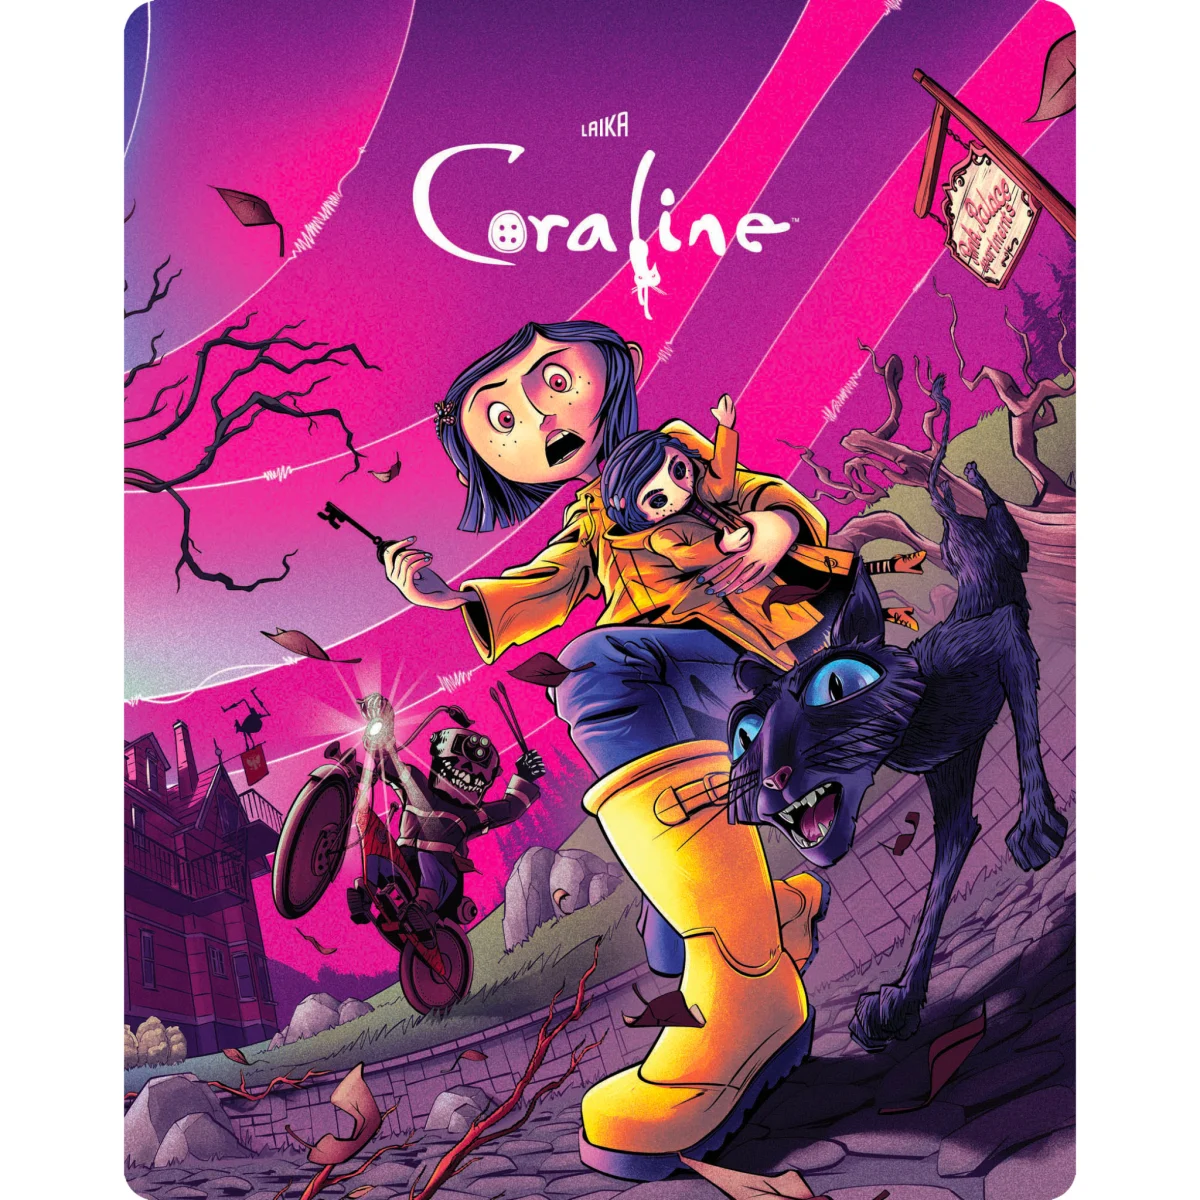 Coraline' Makes $4.91 Million Over 2 Days in Theaters